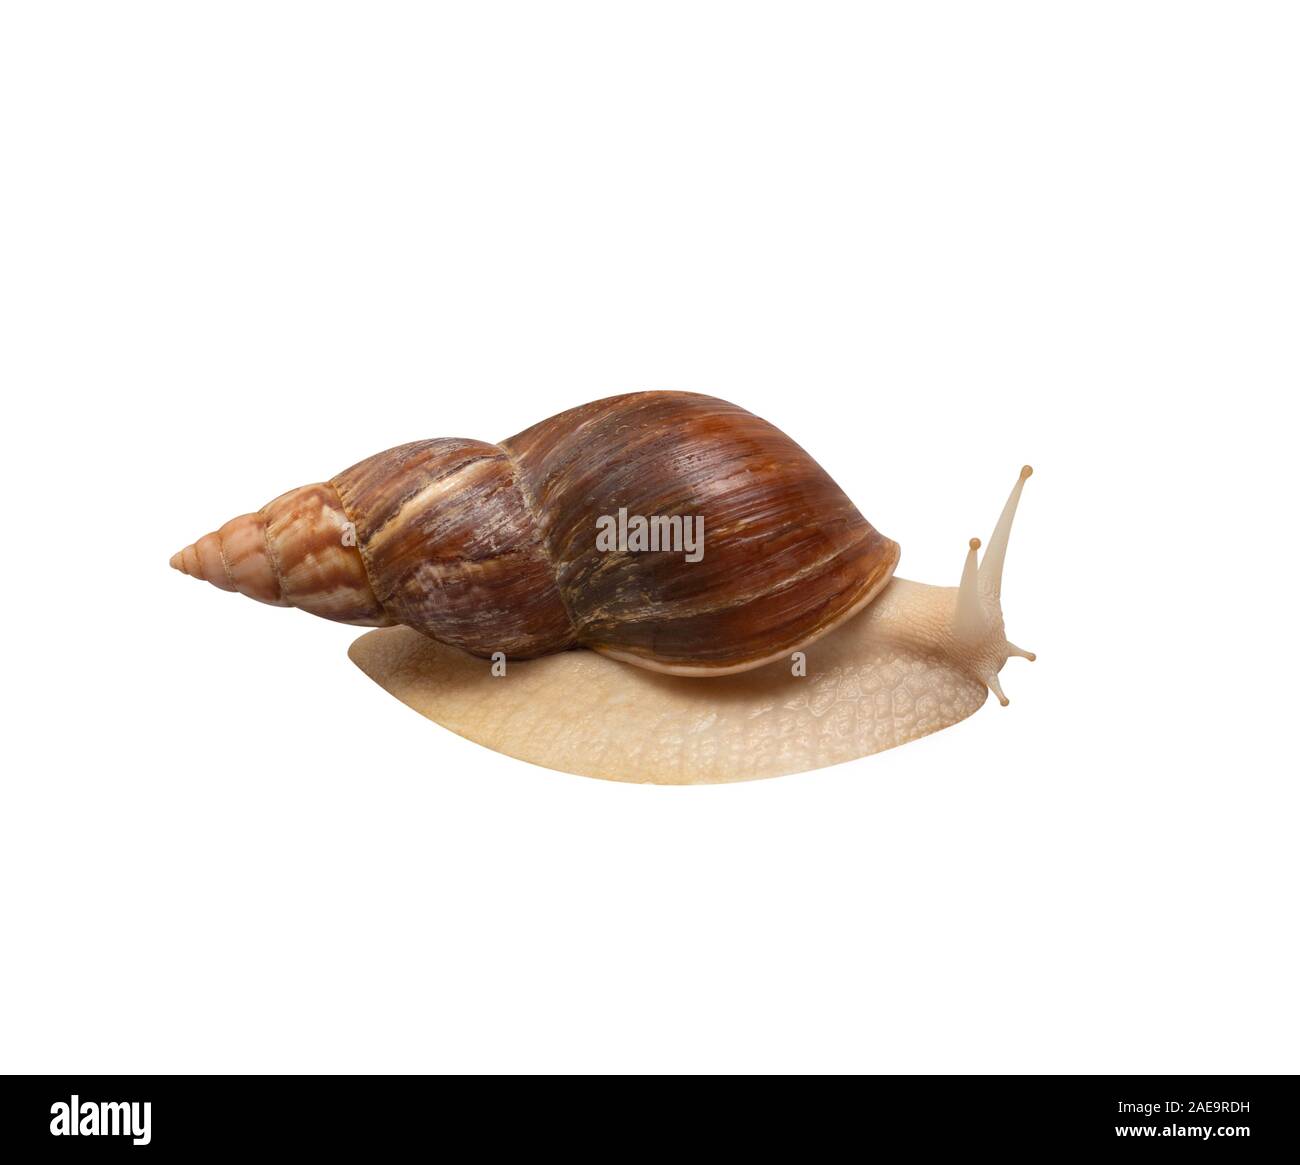 Giant African snail Achatina isolated on white background. Tropical snail Achatina fulica with shell. Achatina snail closeup. Macro, side view. Stock Photo